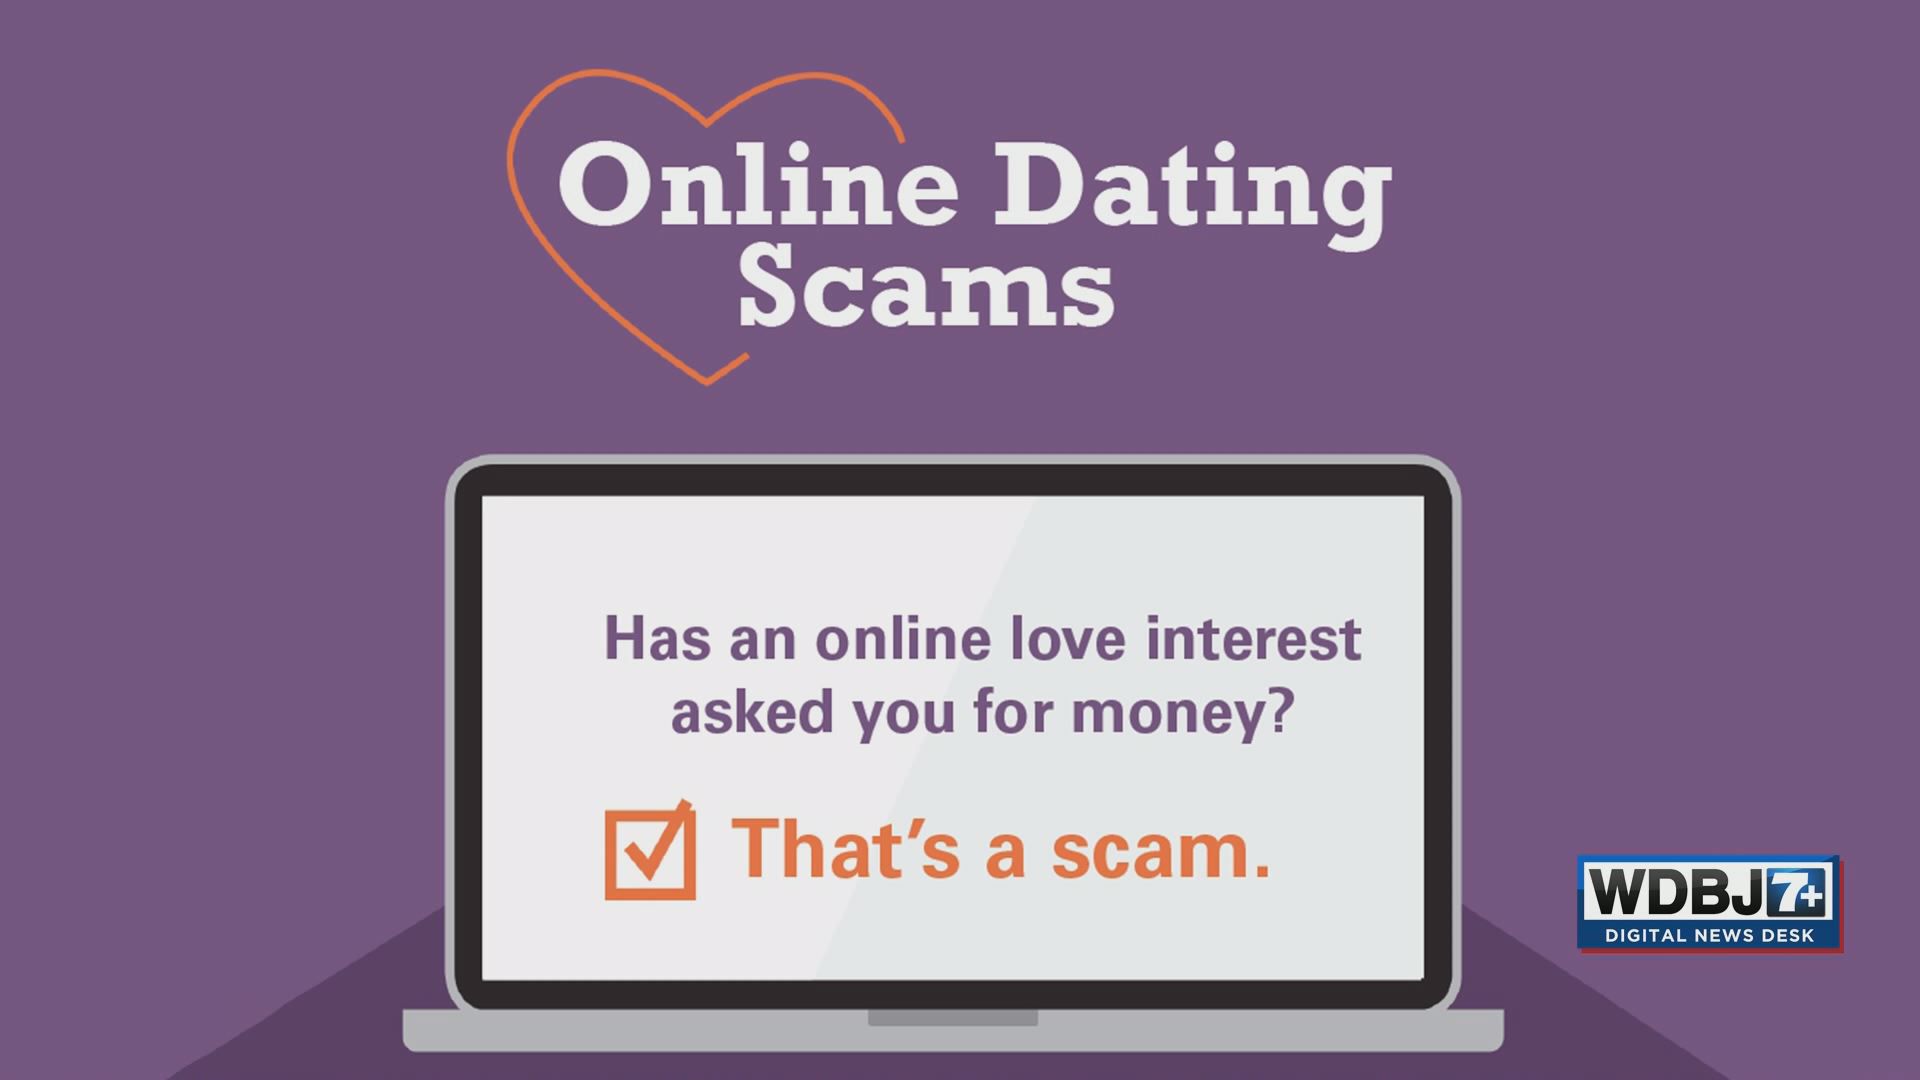 How to spot and avoid online dating scams